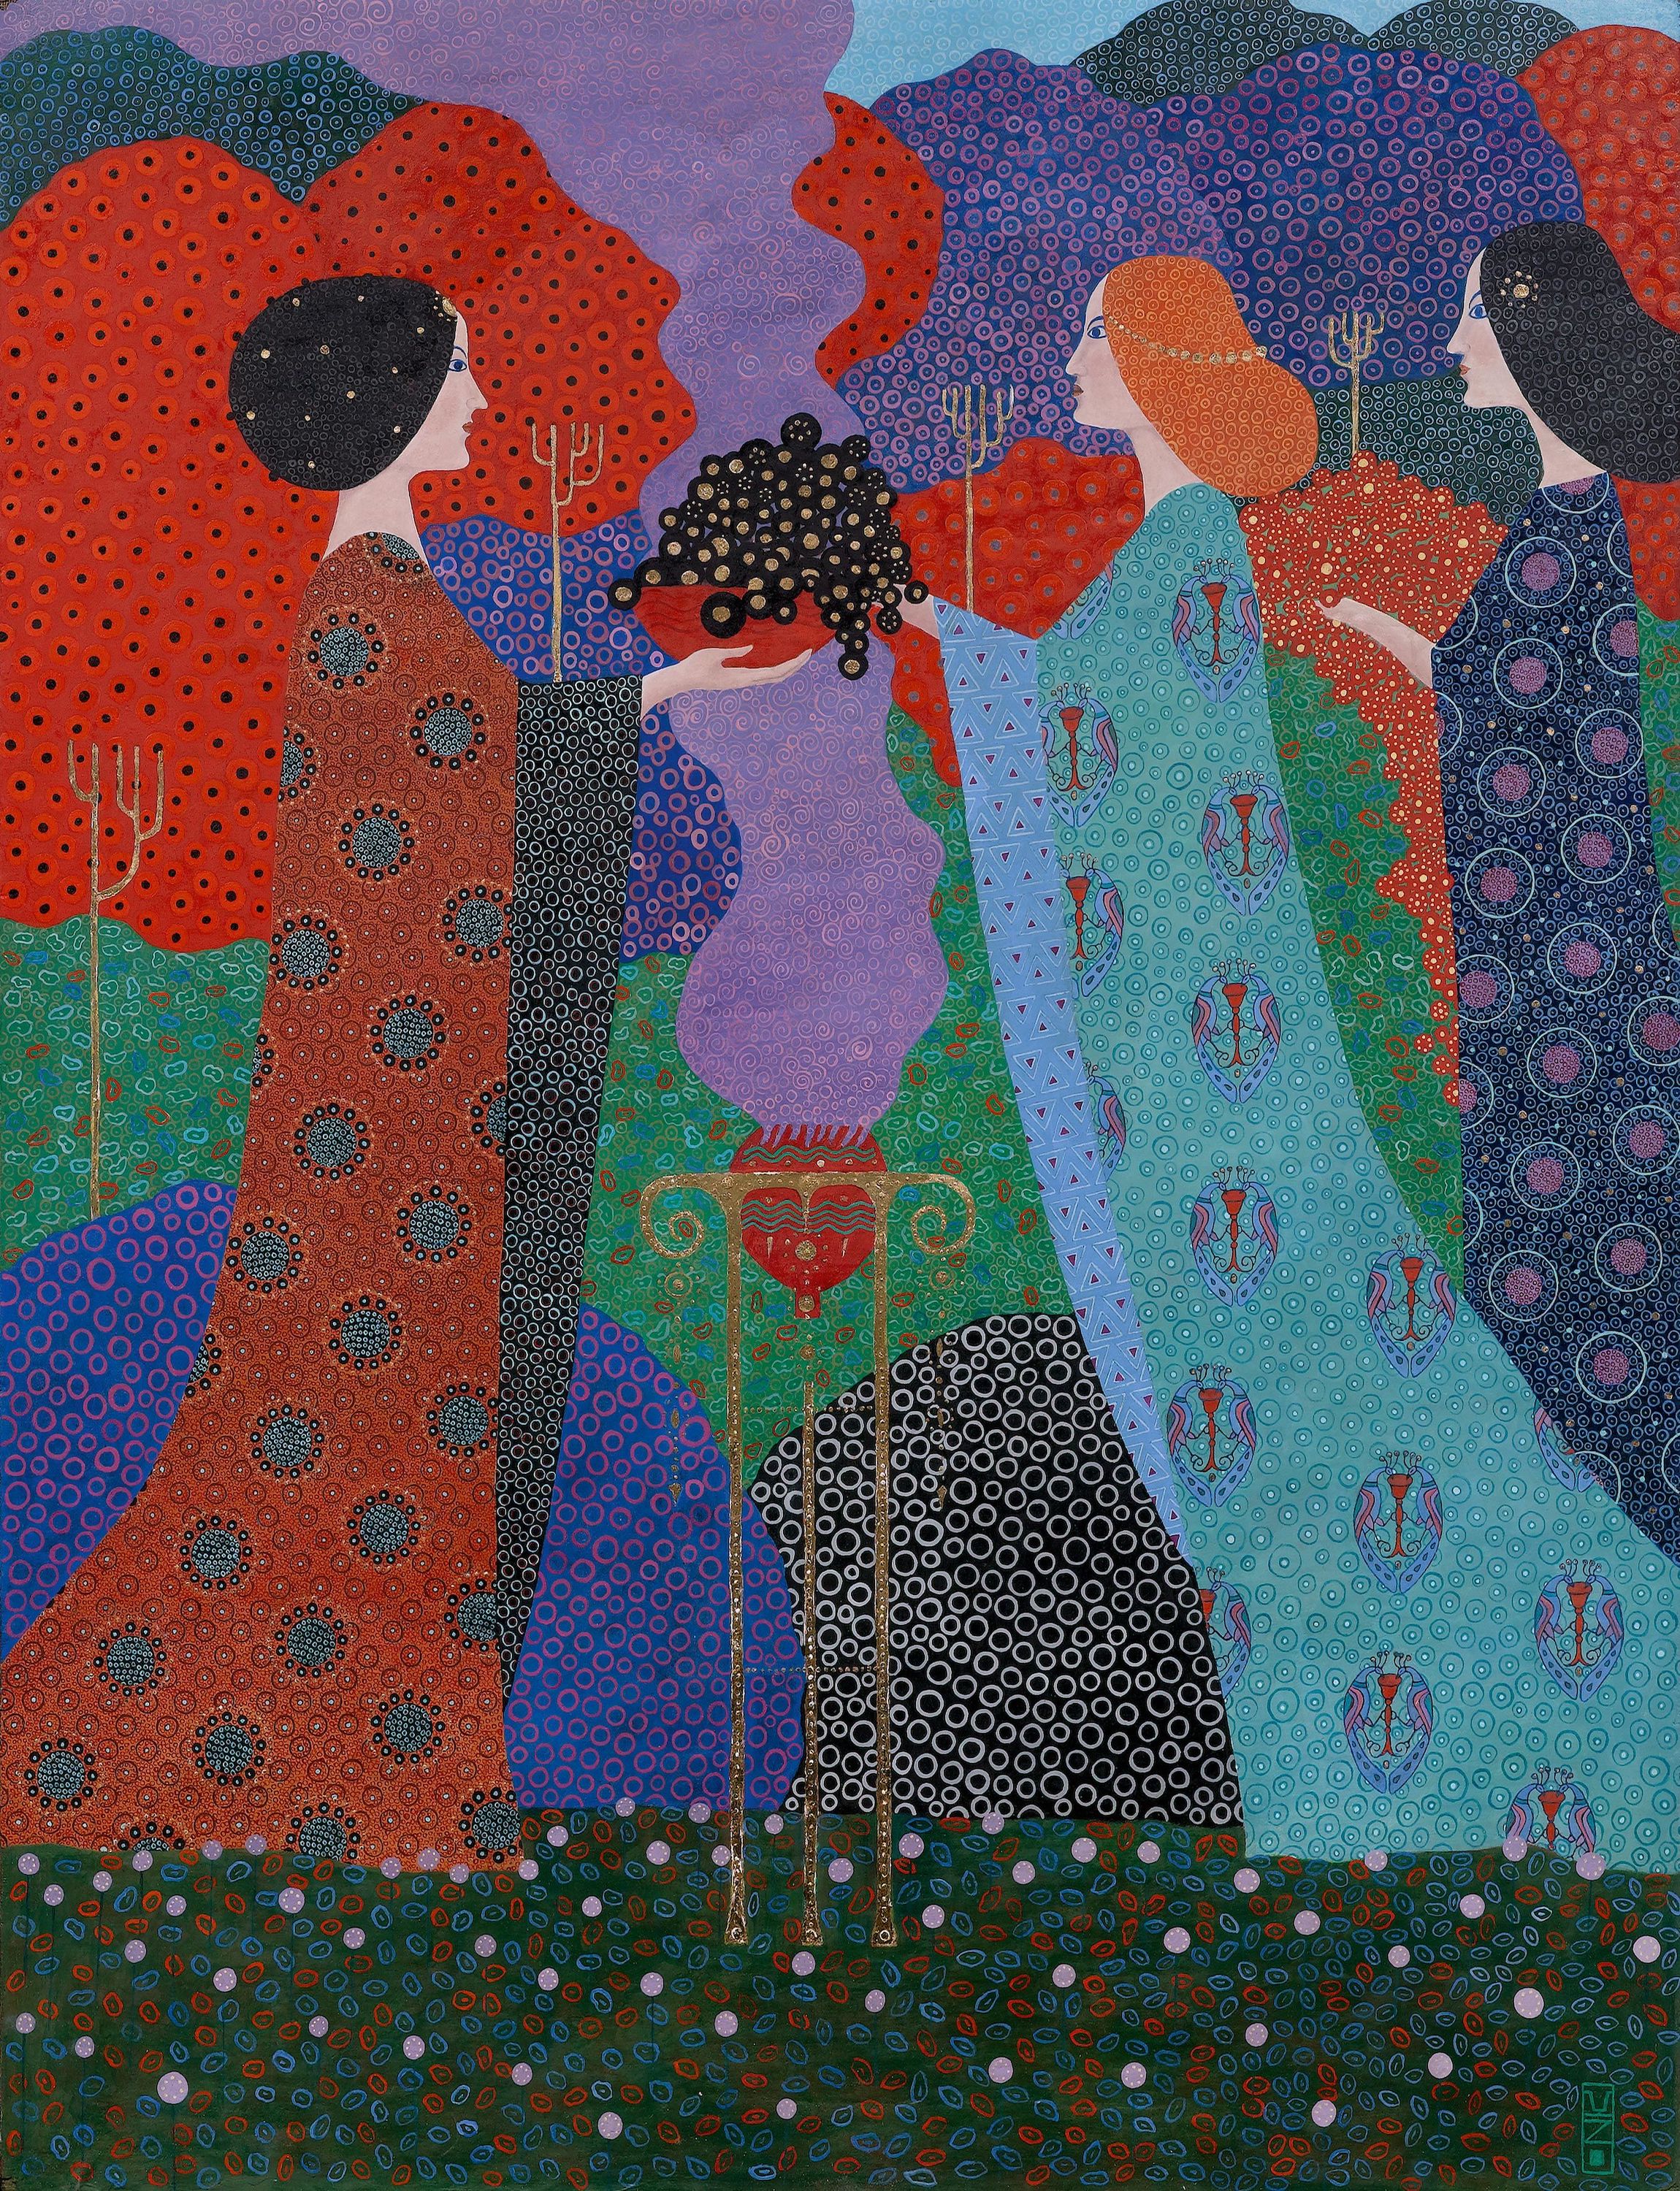 The Thousand and One Nights by Vittorio Zecchin - 1914 - 140 x 110 cm private collection